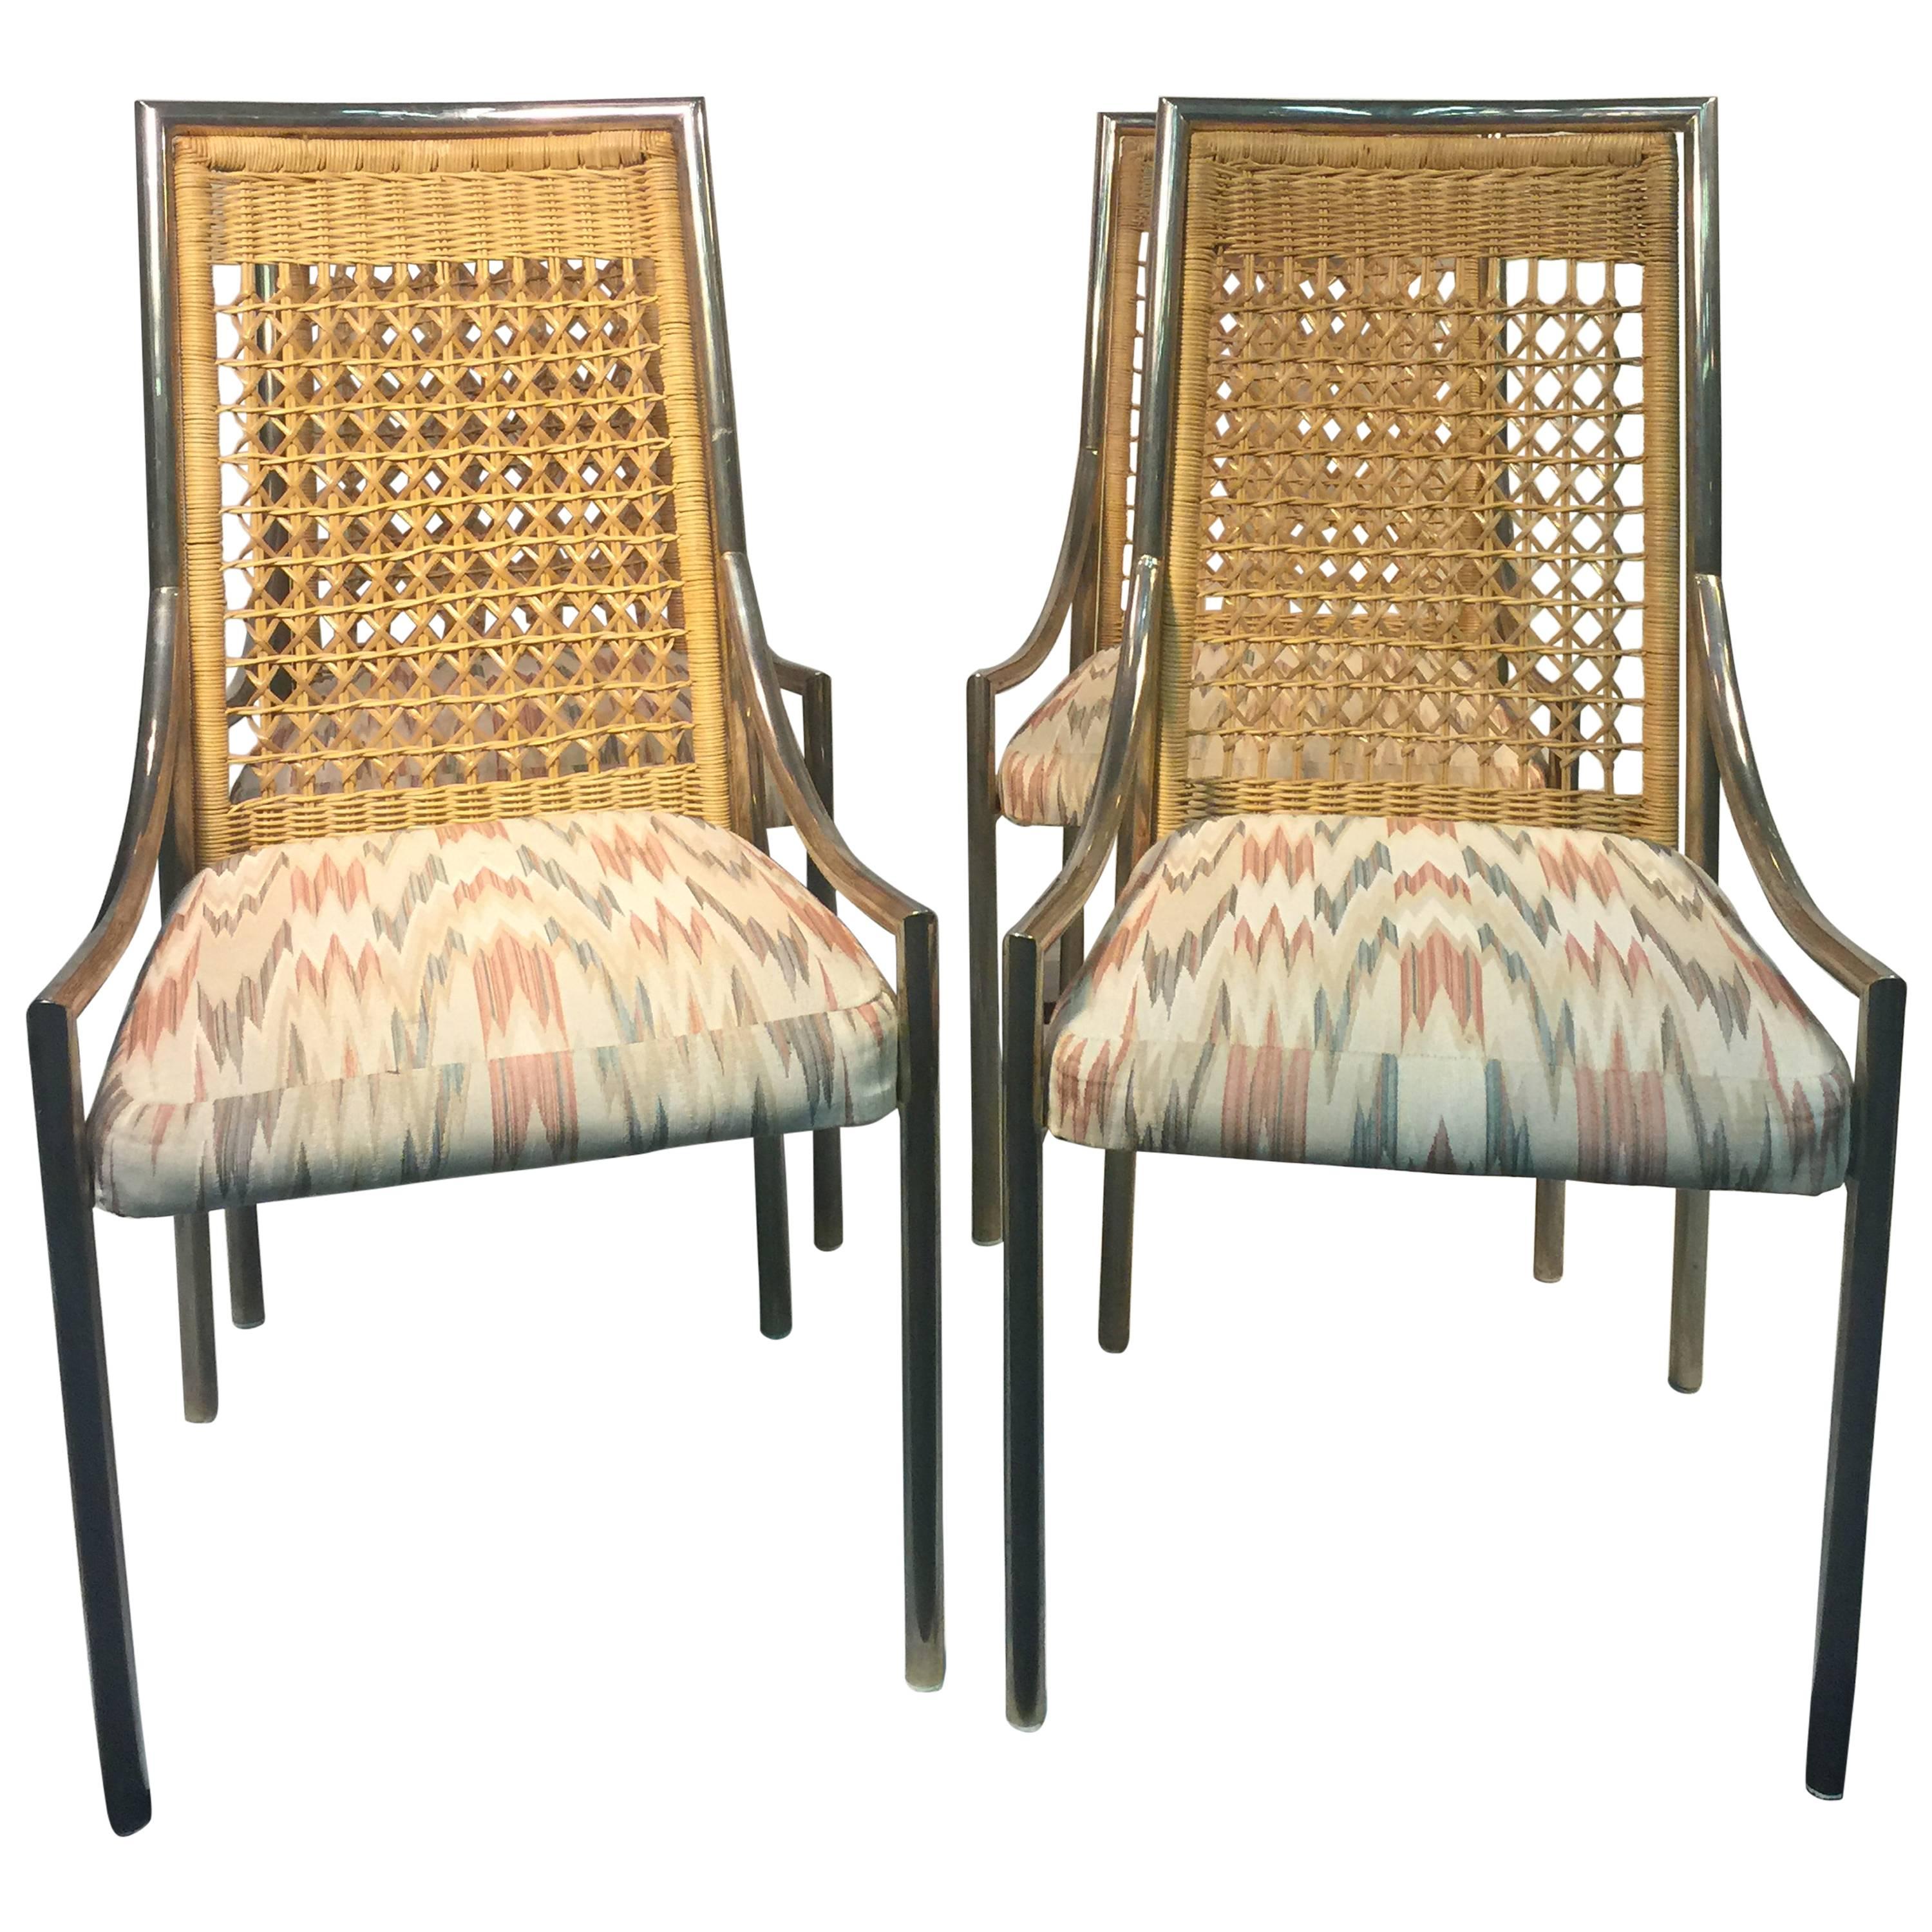 Elegant Set of Four Rattan High Back Chairs in the Manner of Mastercraft For Sale